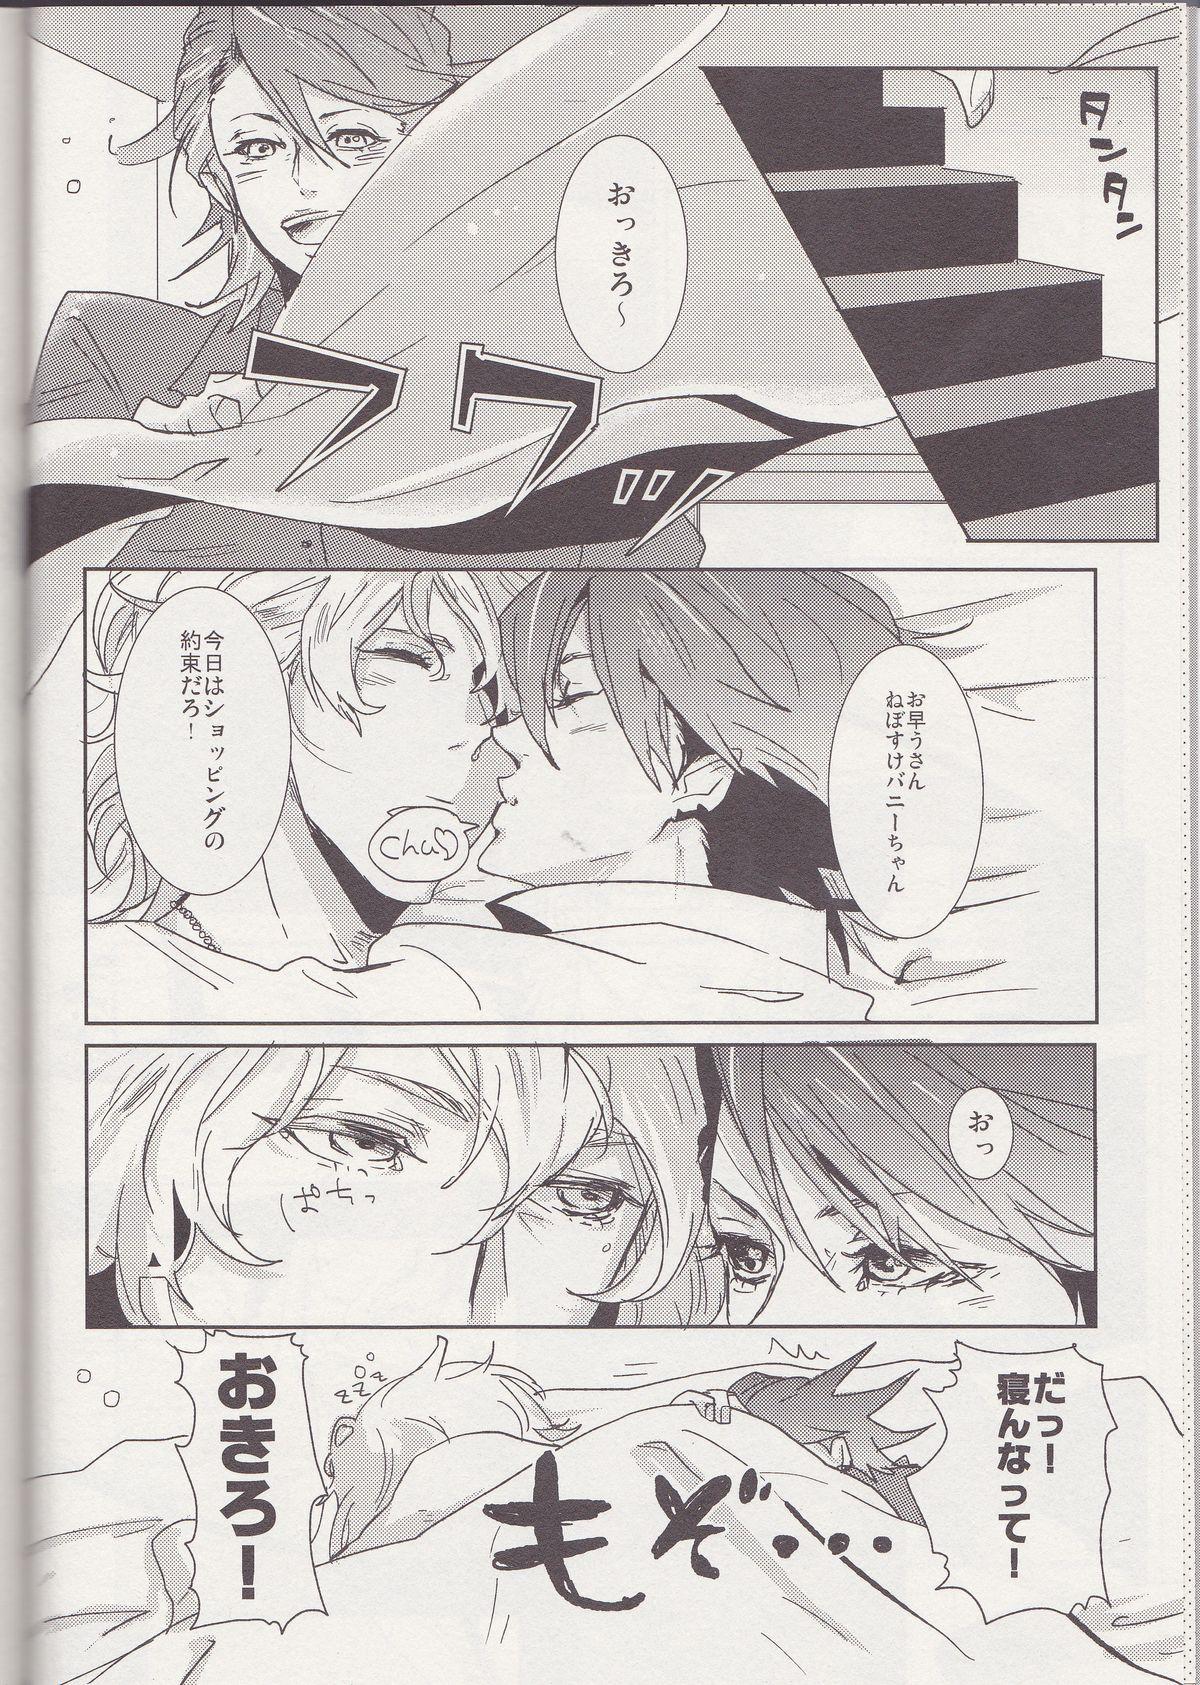 College OBAmaniac - Tiger and bunny 1080p - Page 8